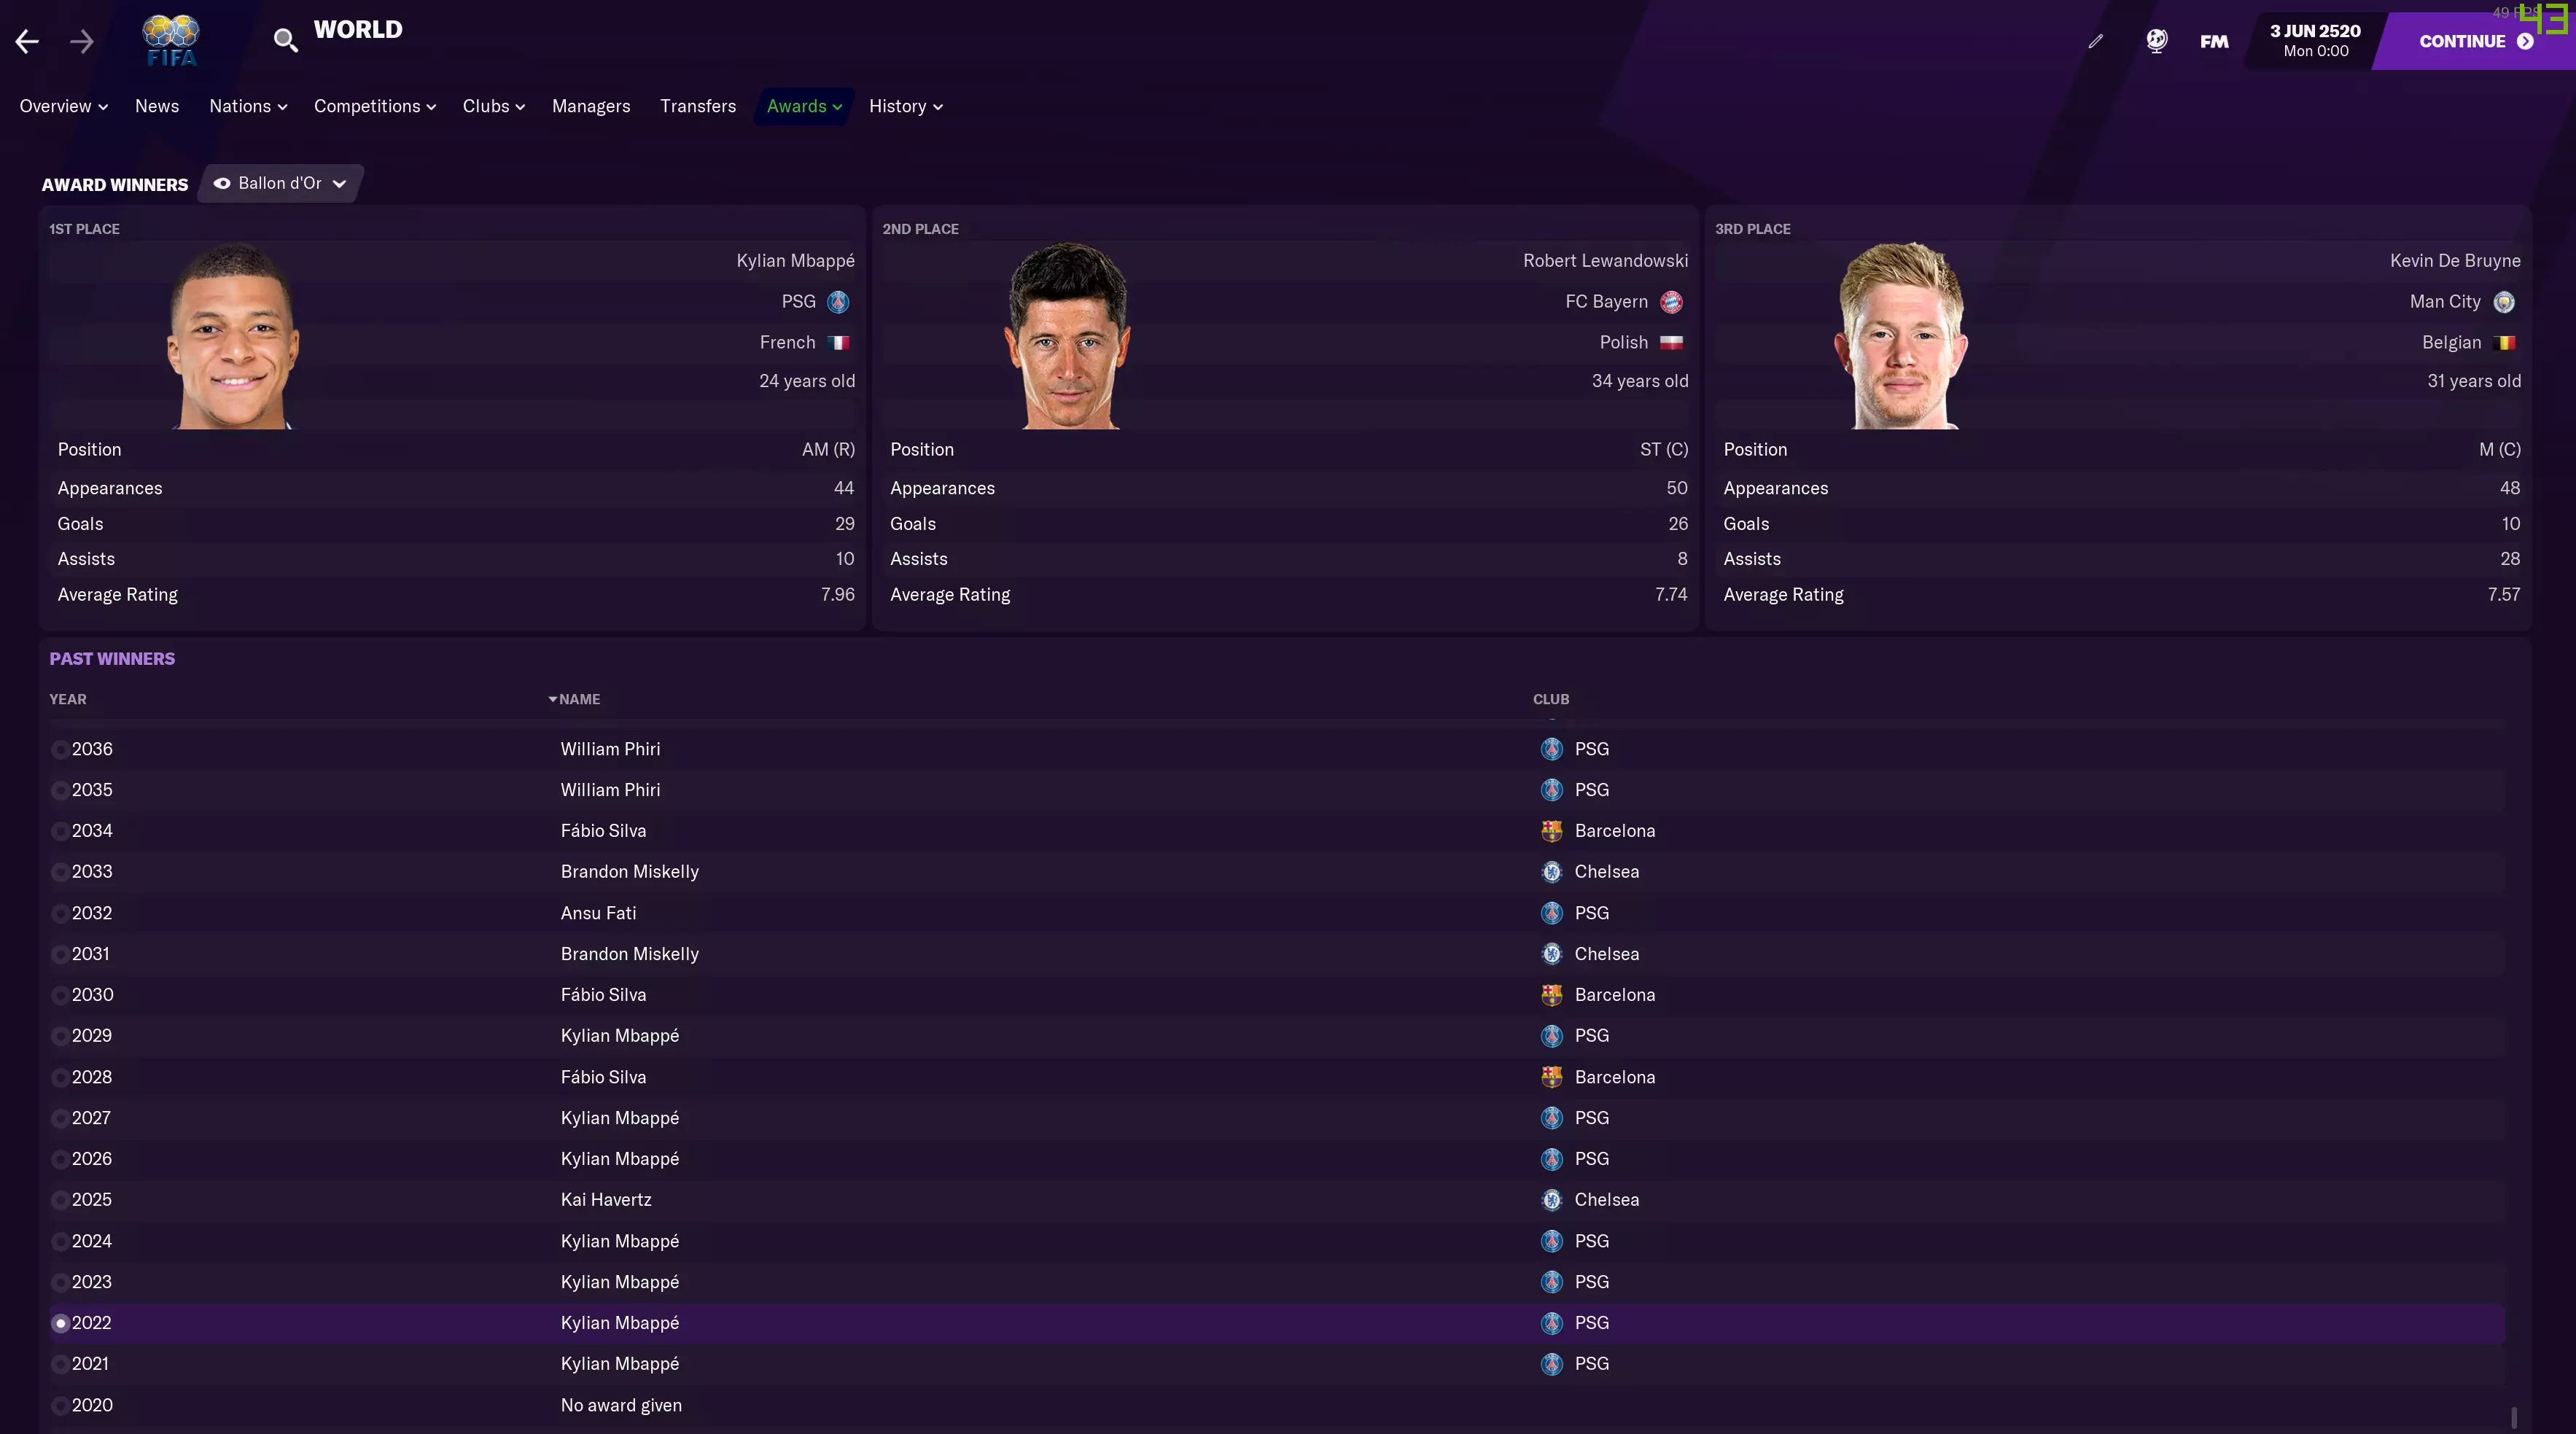 Image: Football Manager 2021